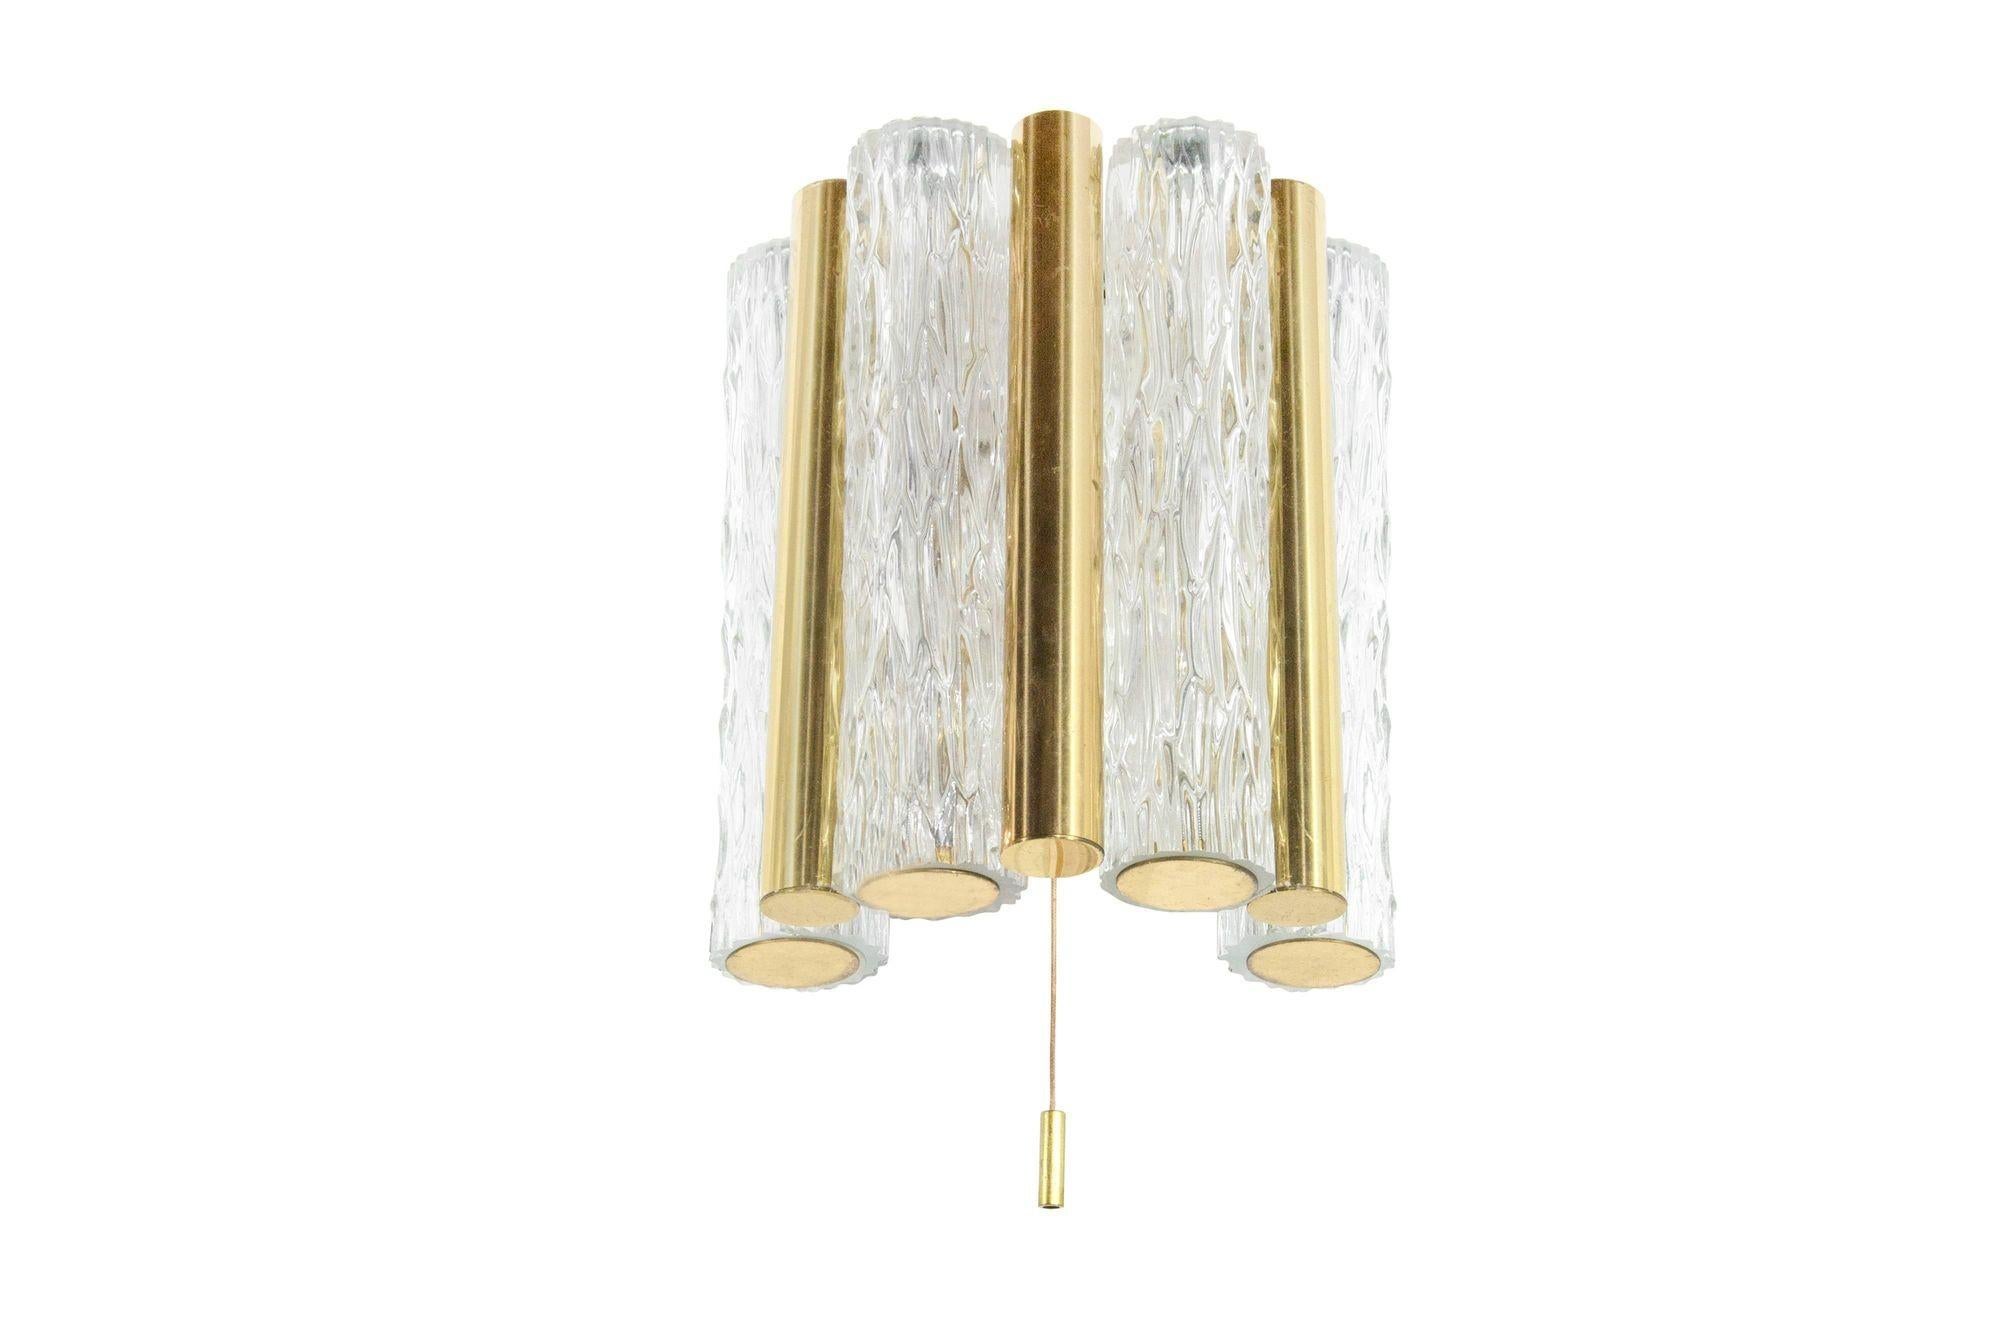 Mid-Century Modern Set of Murano Glass and Brass Sconces by Doria Leuchten, Germany, C. 1960s For Sale